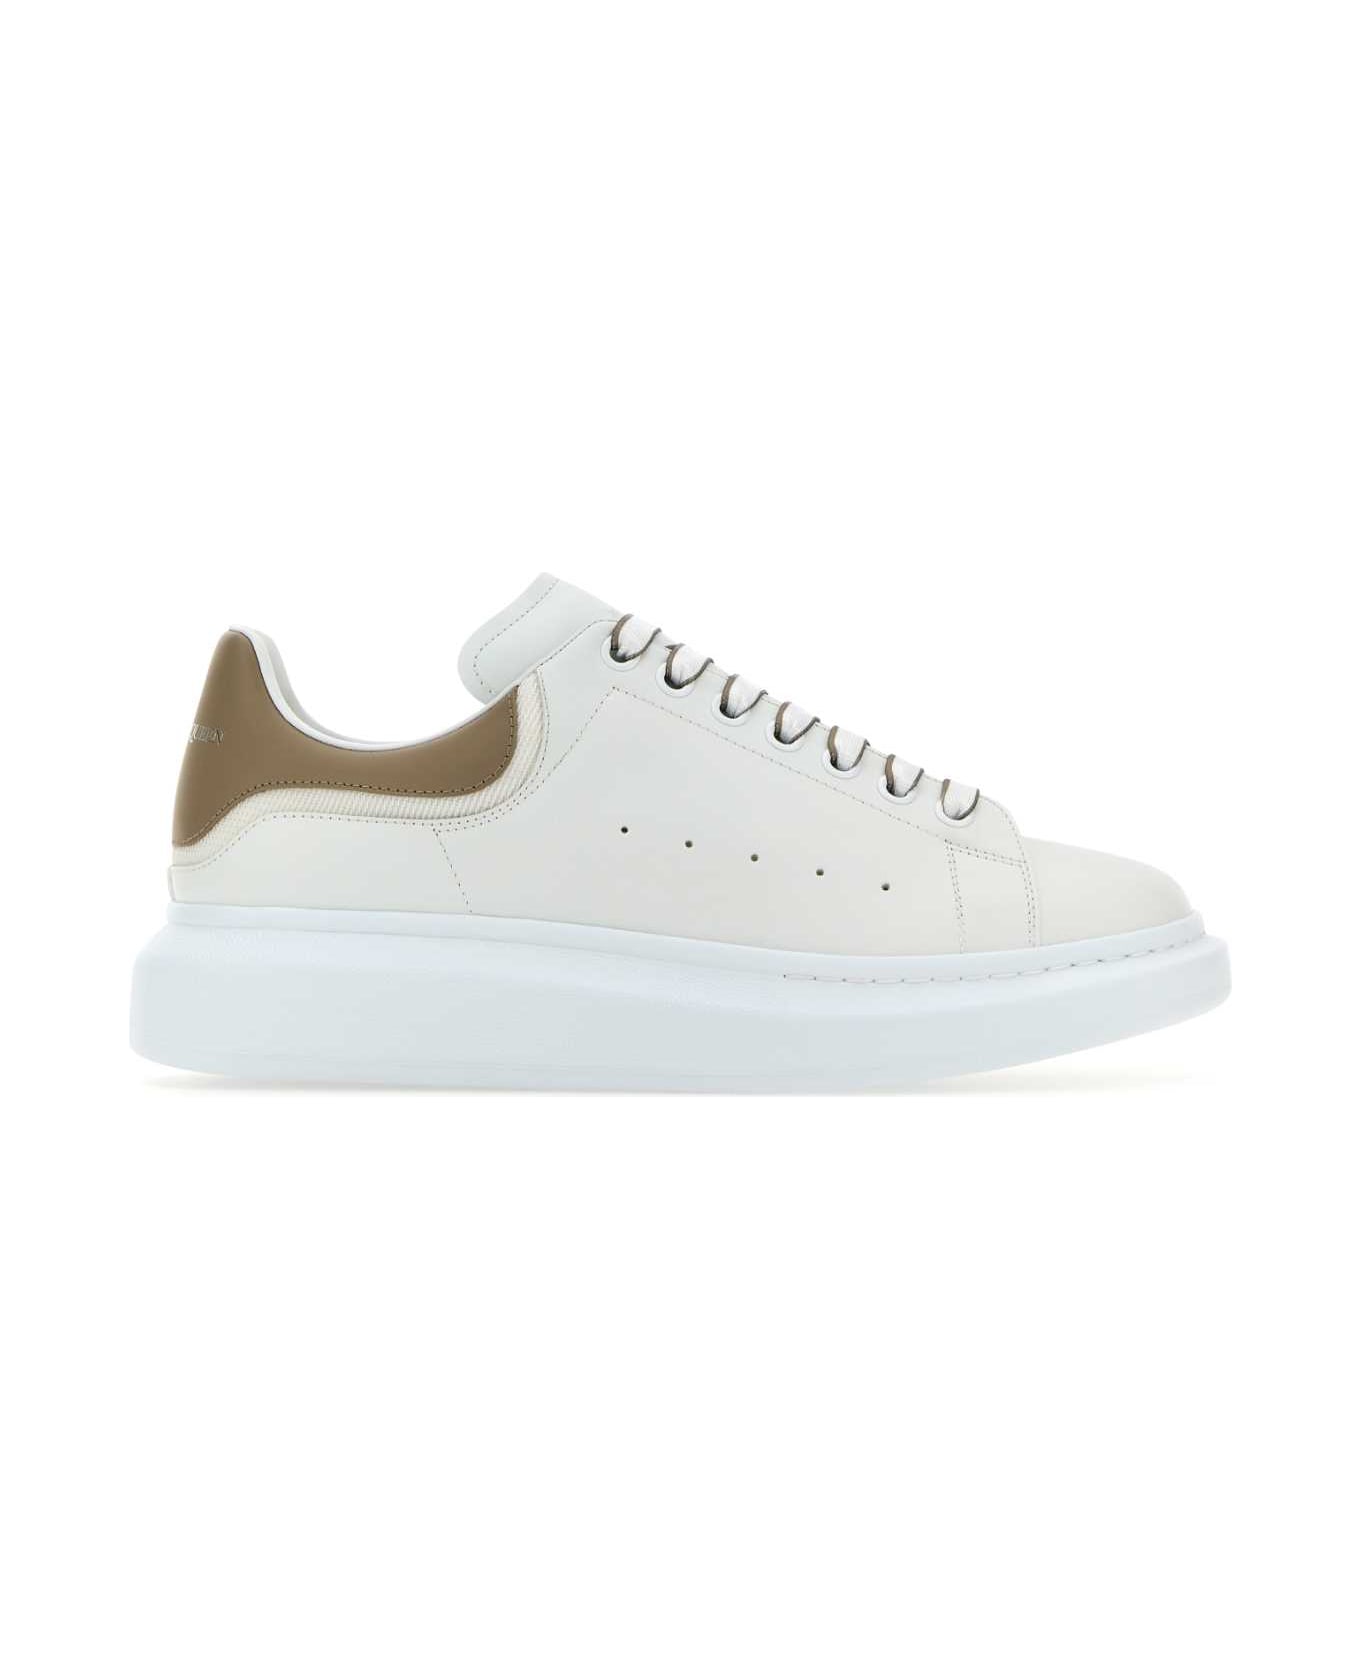 Alexander McQueen White Leather Sneakers With Dove Grey Leather Heel - WHITESTONE